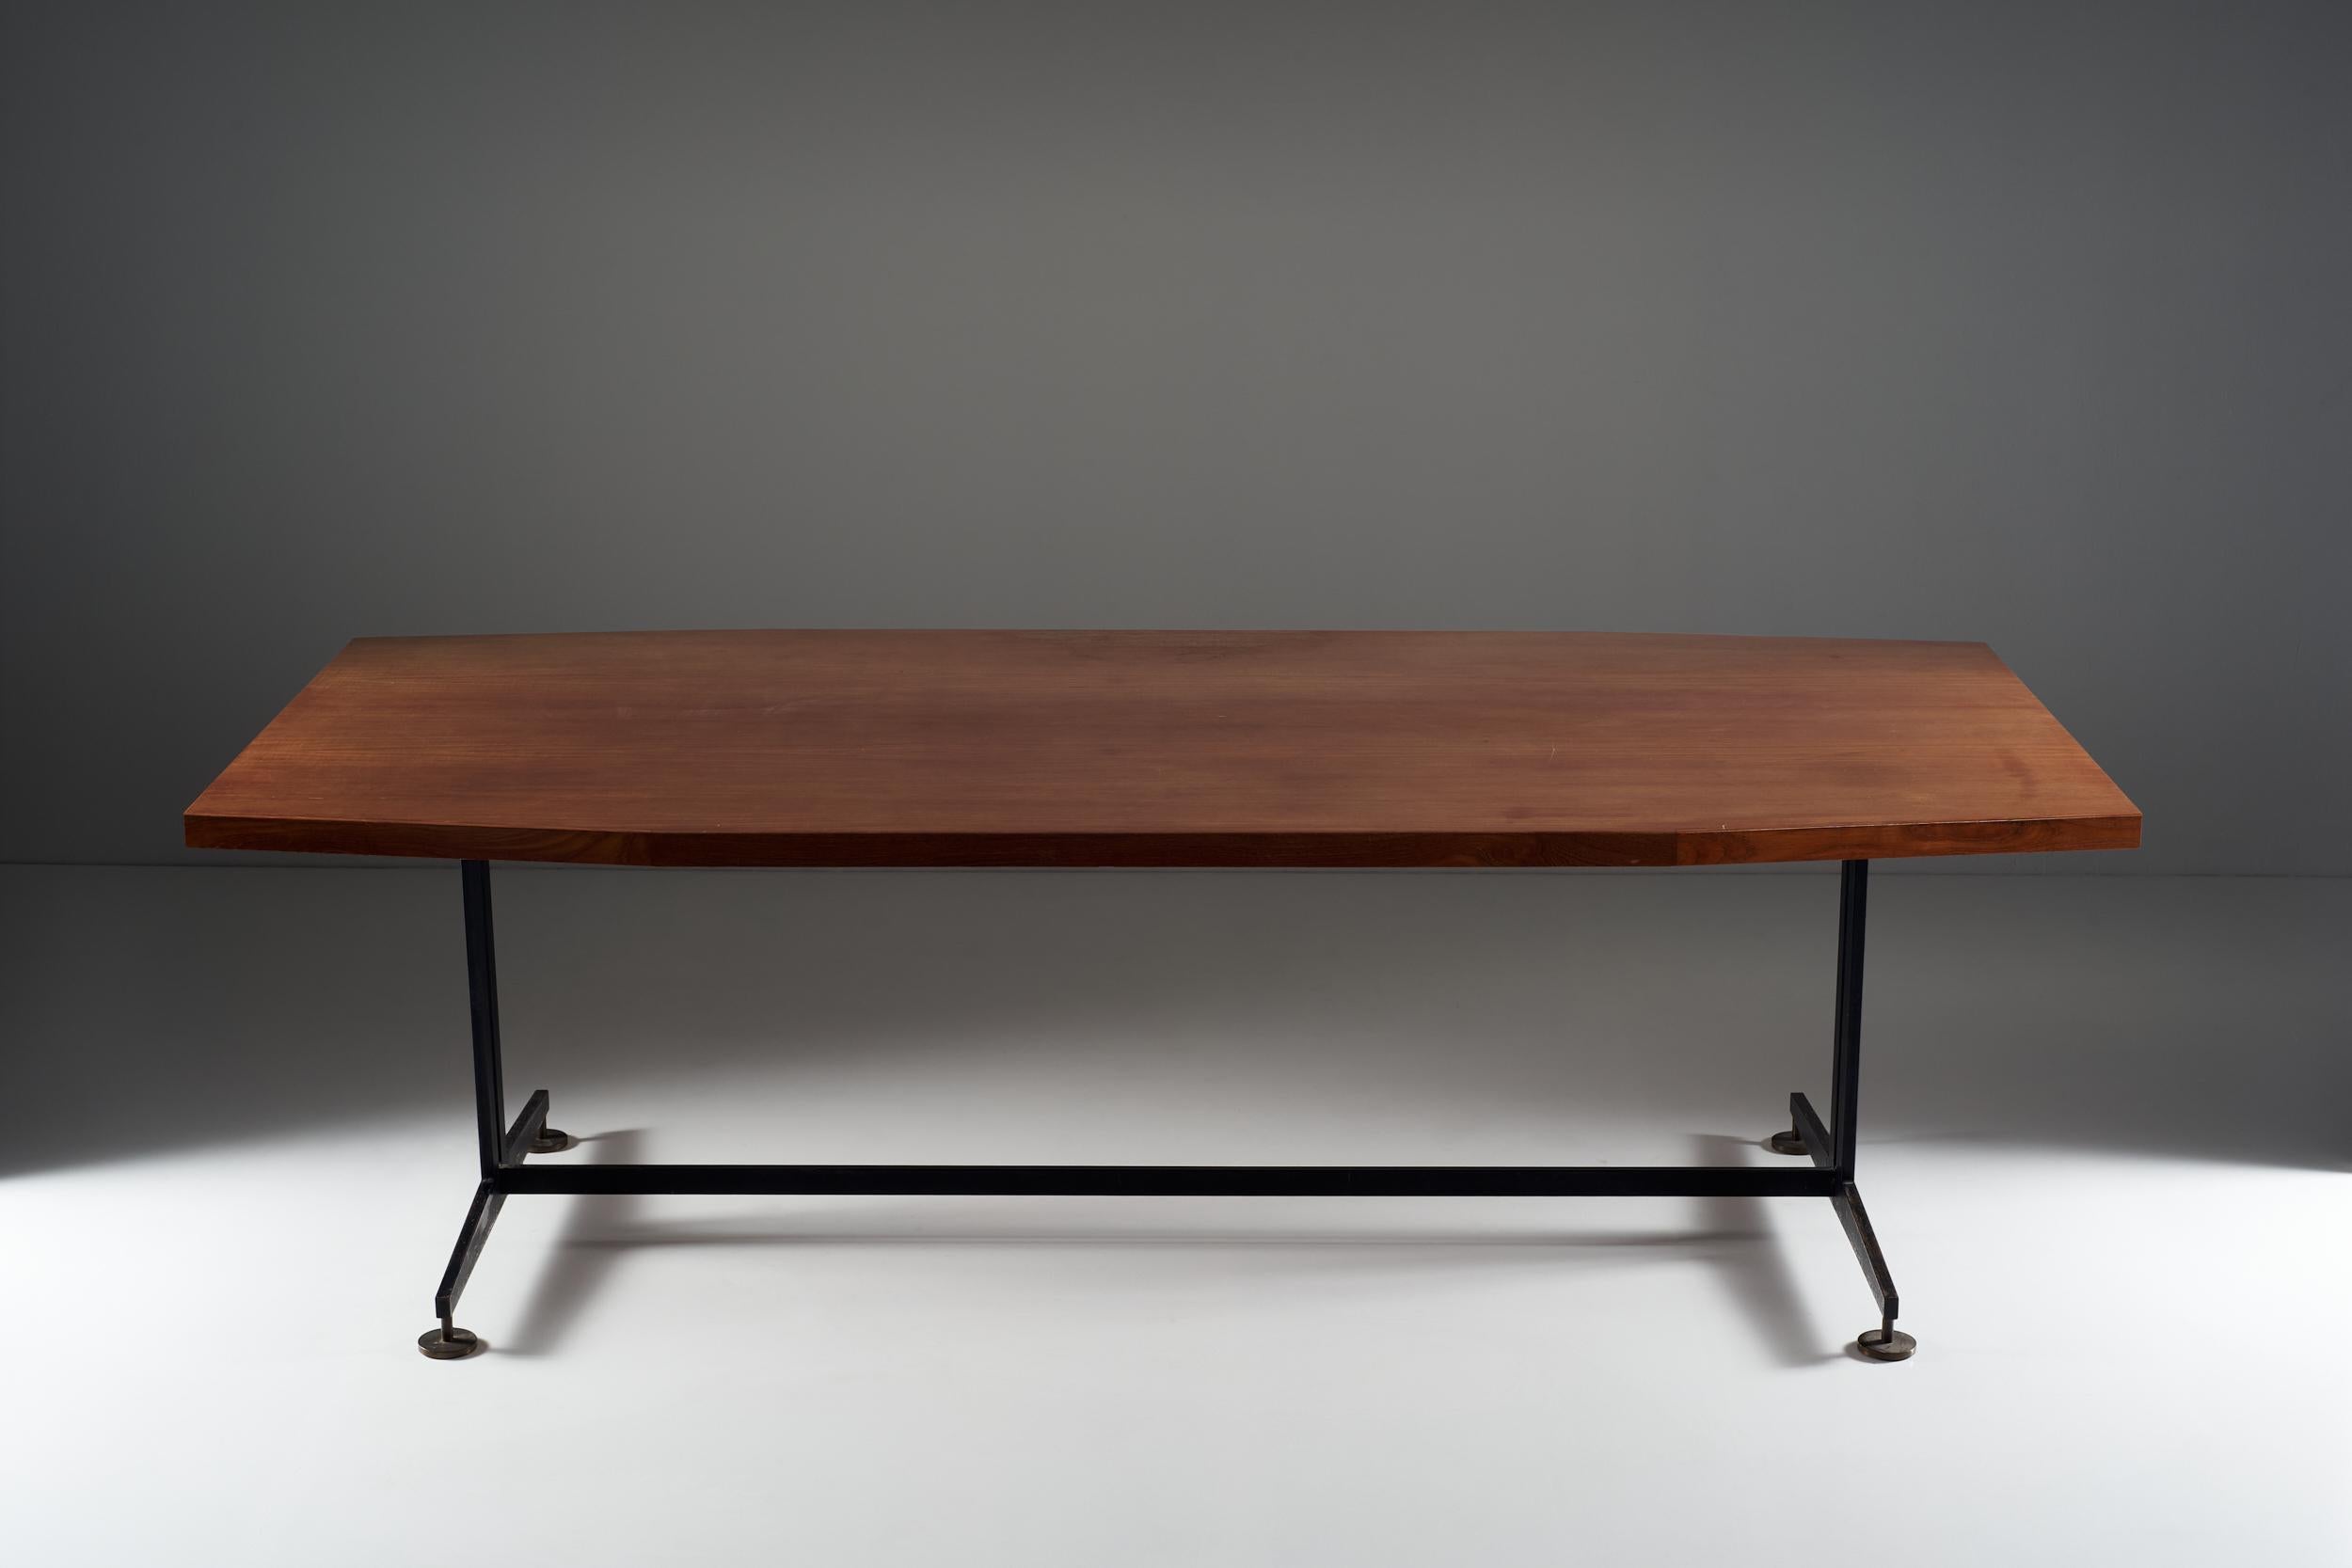 This large wooden table consists of a strong and compact top. The metal legs, lacquered in black, are built according to the lines of the wooden top. The feet form circular plates that give security and solidity to the whole structure. This Italian